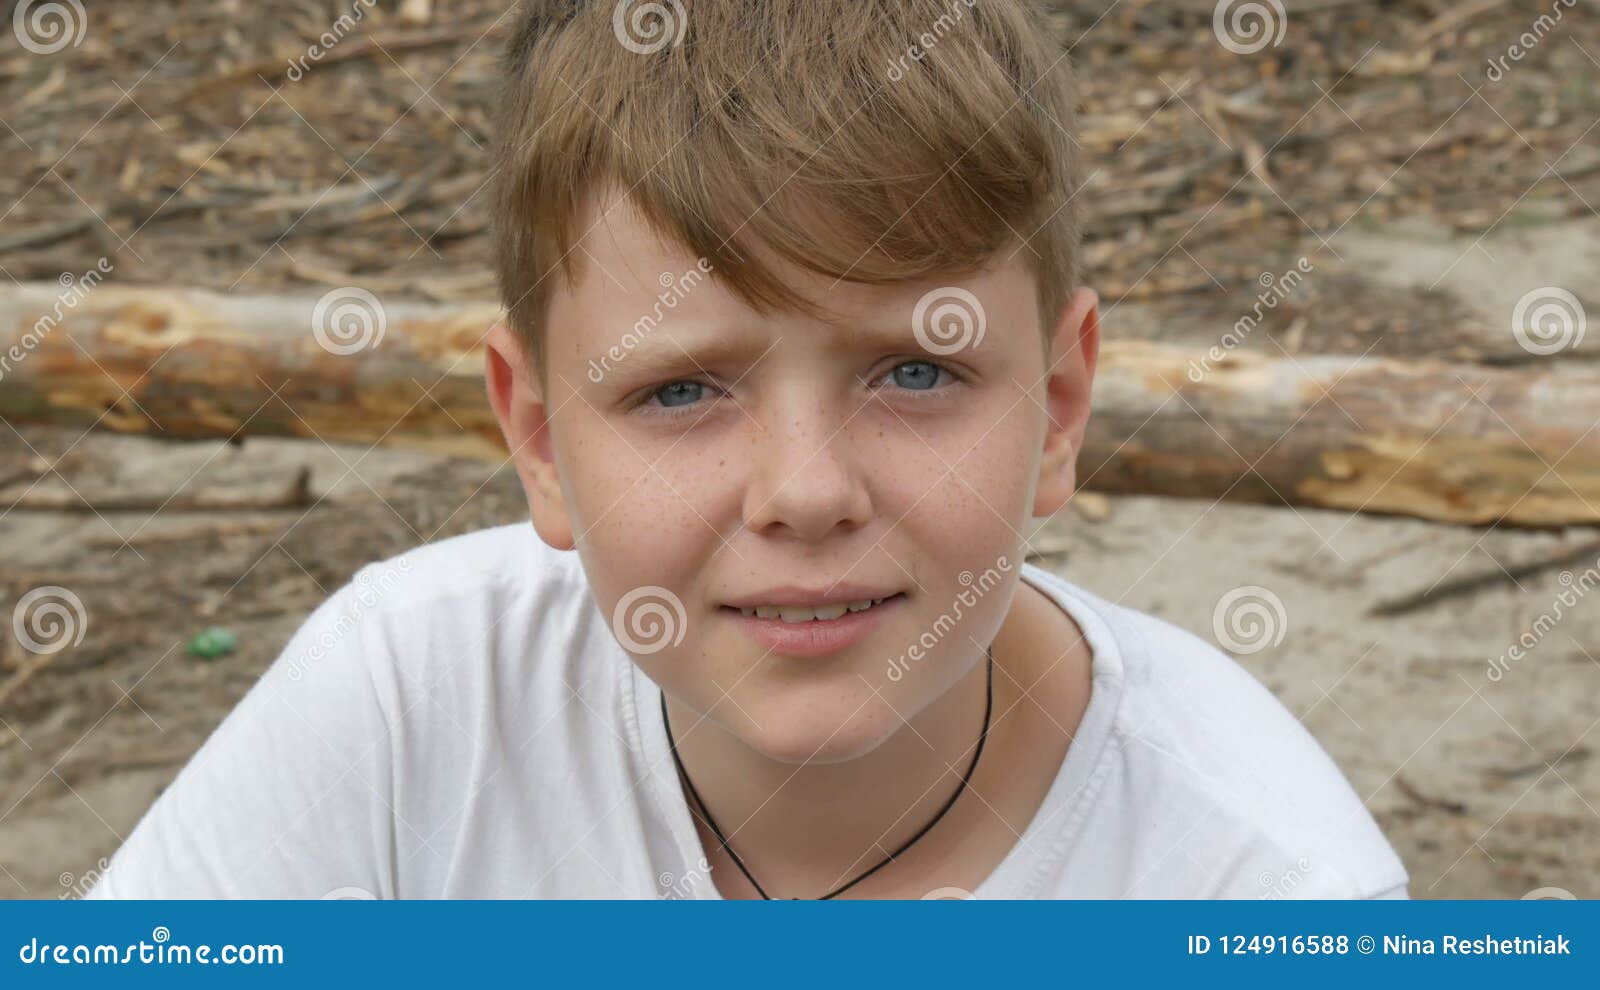 Emotional Portrait Of Red Haired Teenager Boy With Blue Eyes And Freckles That Looks Into The Camera Greenery Backpack